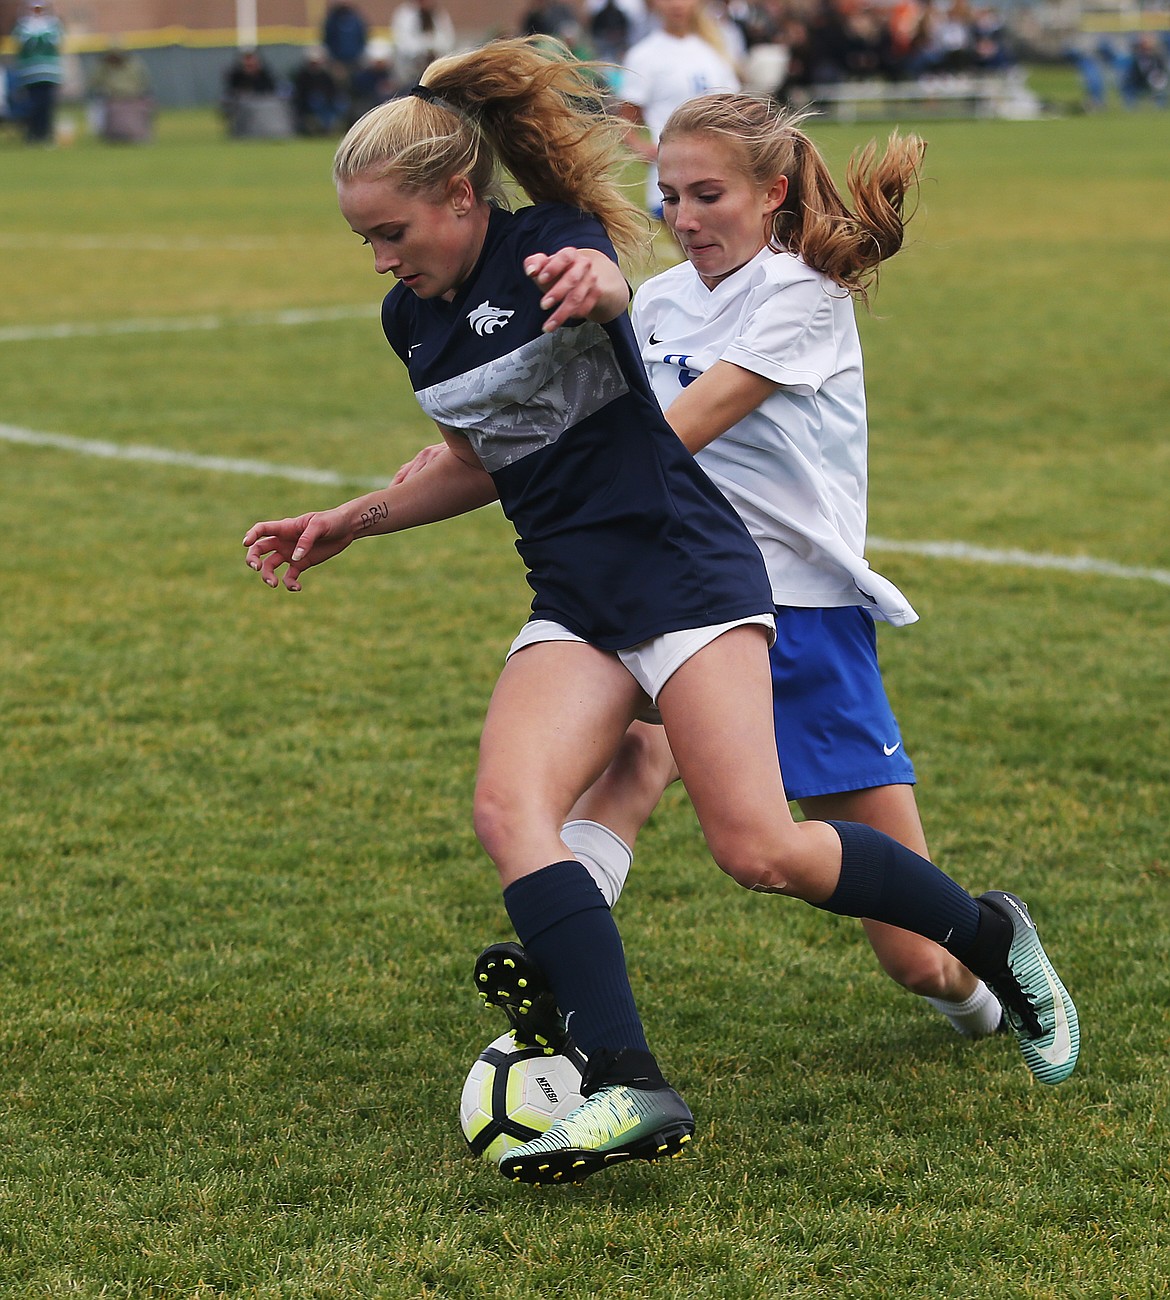 Lake City's Sammie Veare and Coeur d'Alene's Zoe Cox fight for the soccer ball in Tuesday's Region 1 girls championship game at Lake City High School. (LOREN BENOIT/Press)